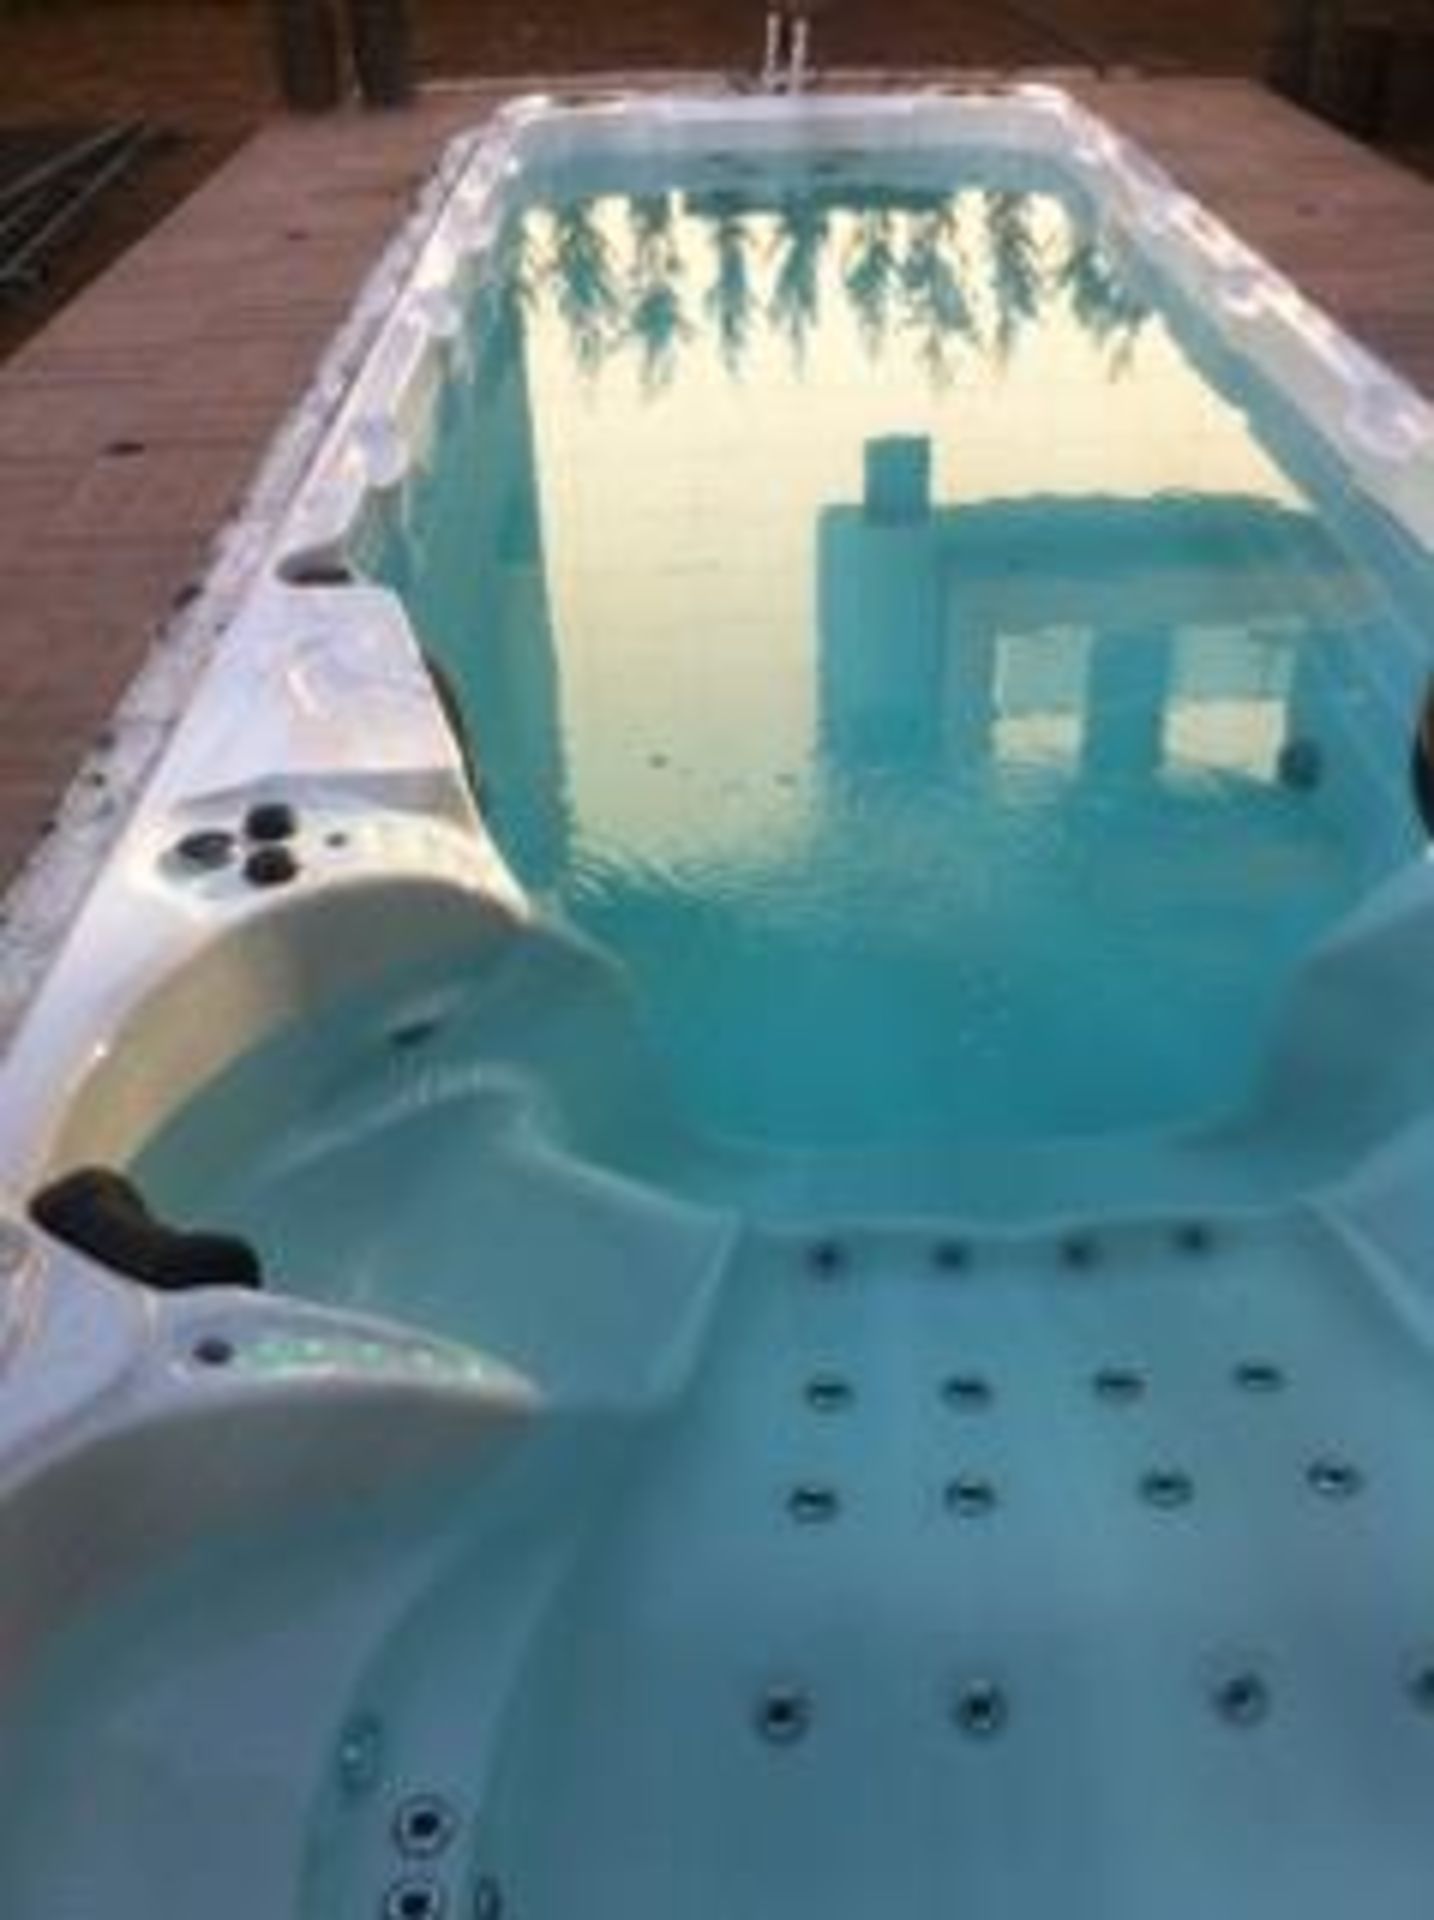 1 x Passion Spa Aquatic 6 - 7.8-Metre Swim Spa - Brand New With Warranty - RRP: £35,000 - CL774 - - Image 6 of 8